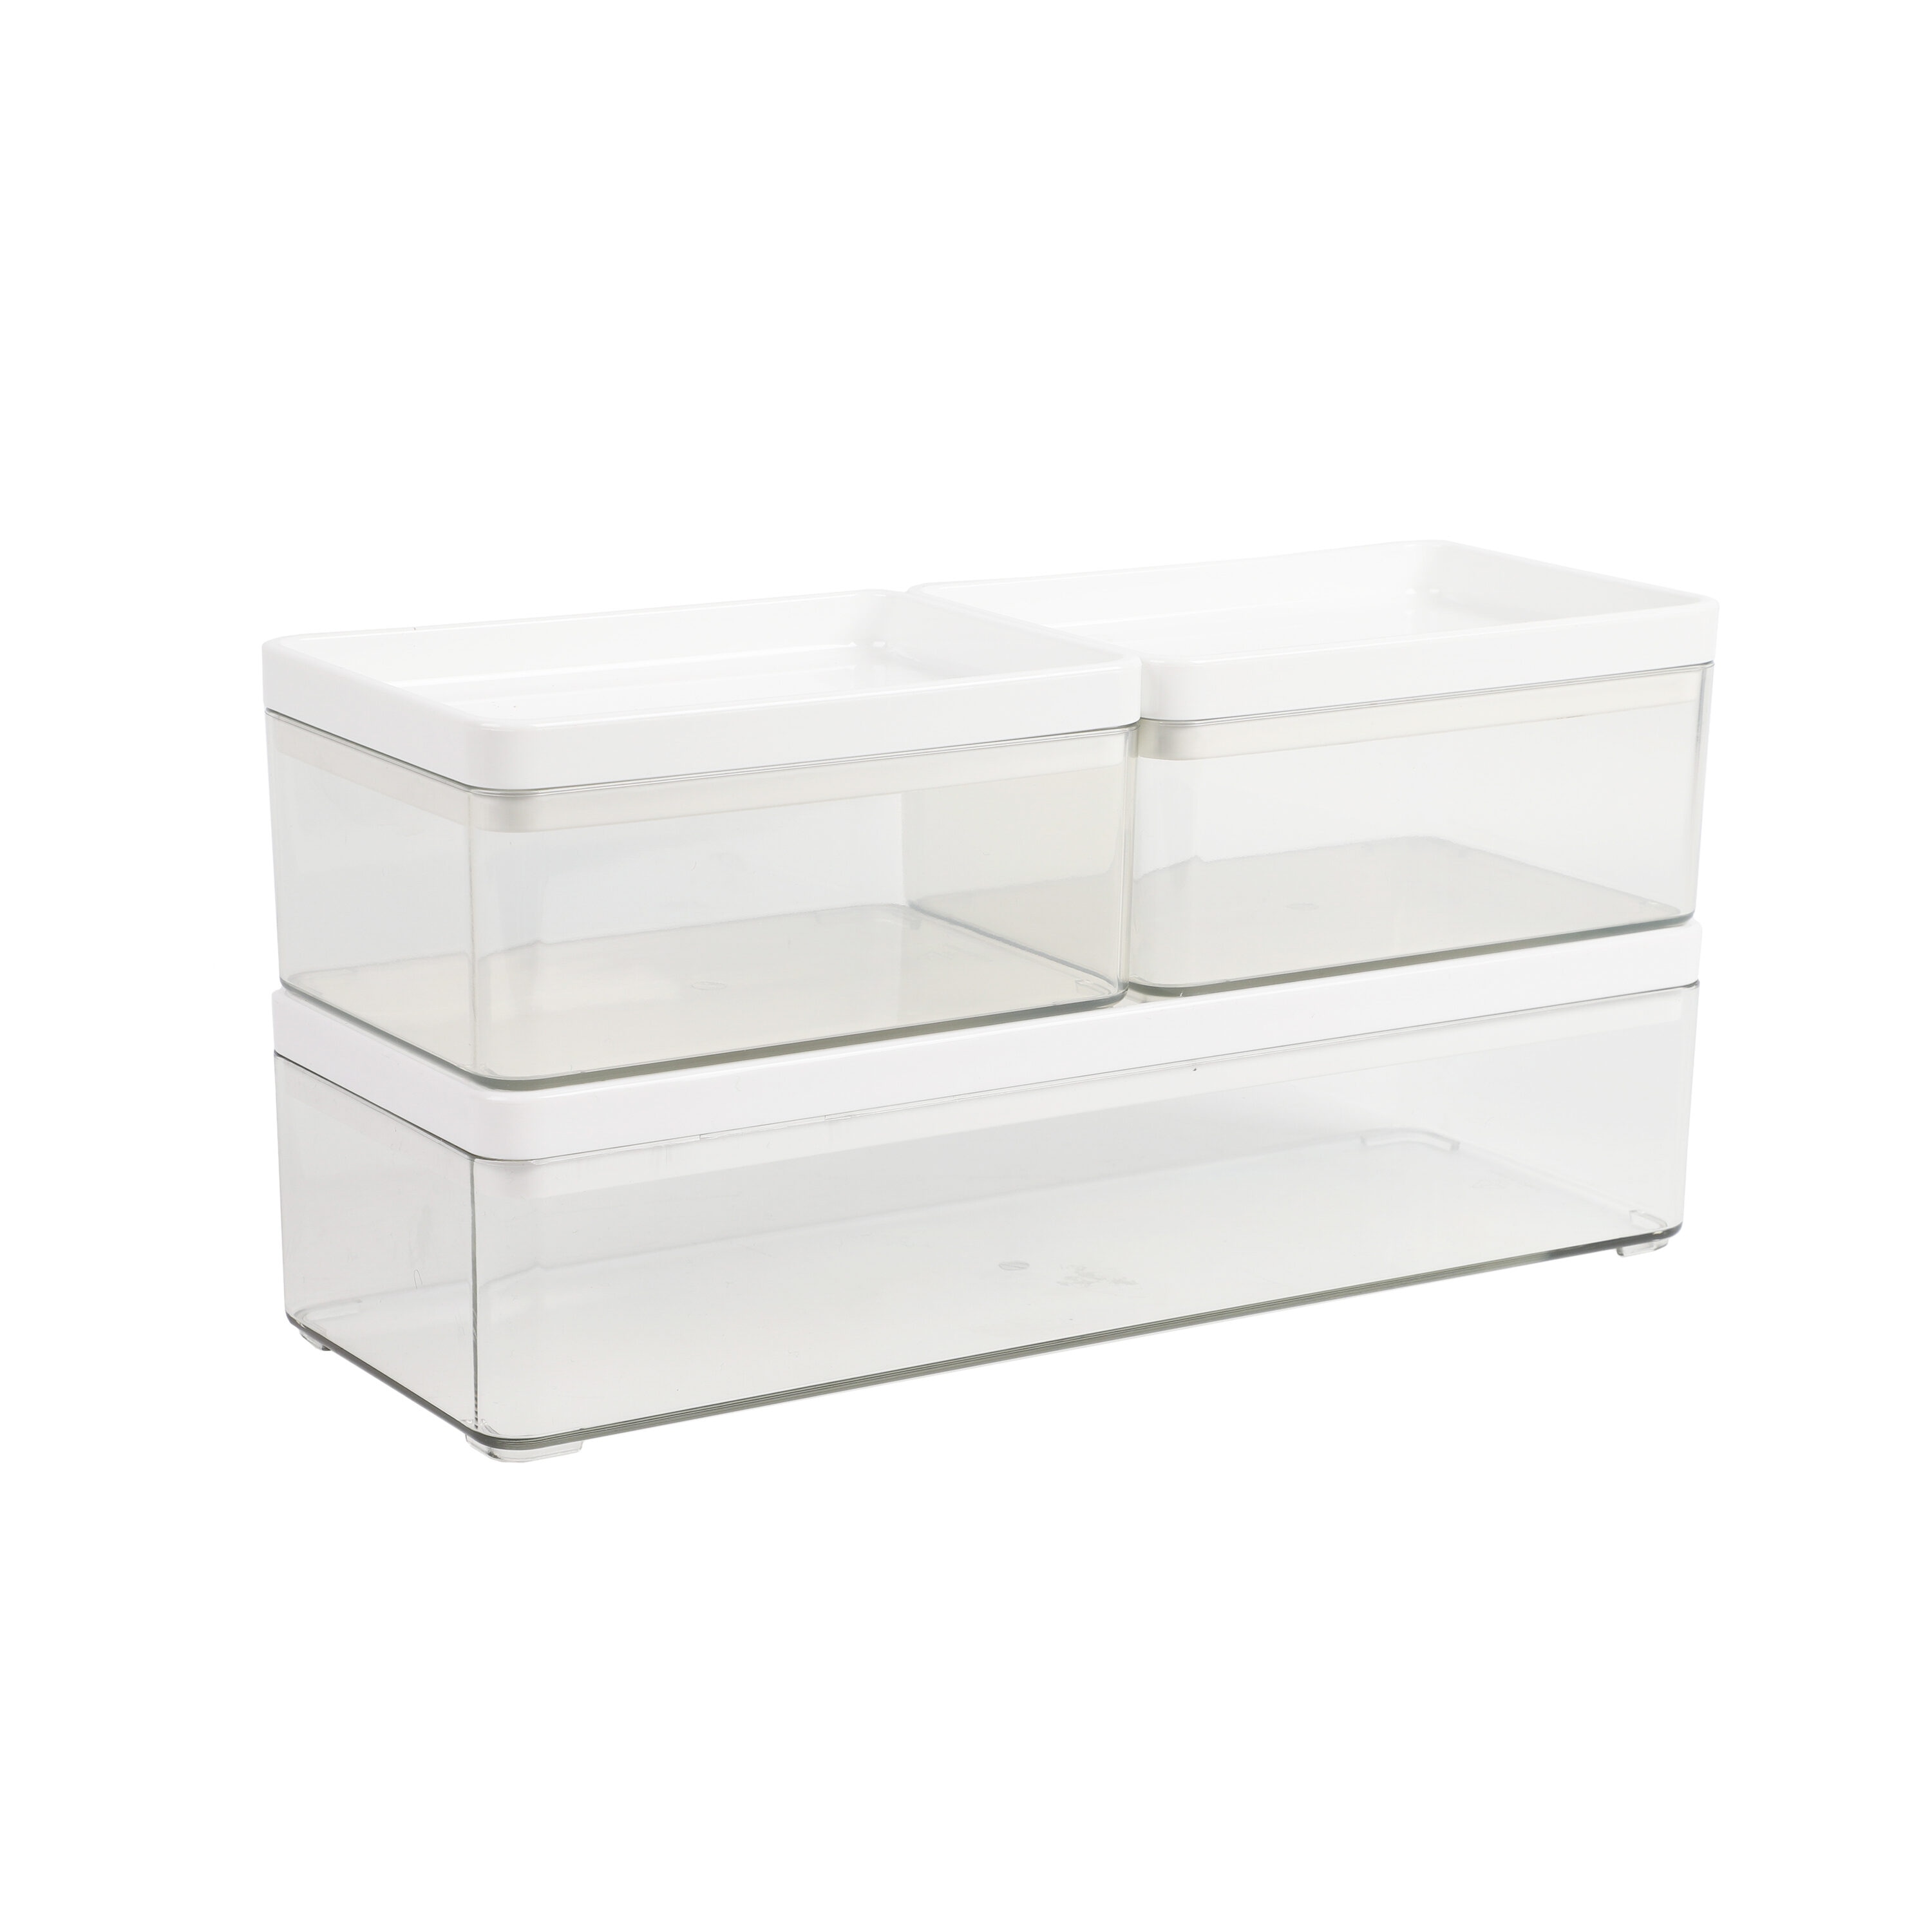 Sterilite Small 5 Drawer Desktop Storage Unit, Tabletop Organizer for Desk,  Countertop at Home, Office, Bathroom, White with Clear Drawers, 4-Pack